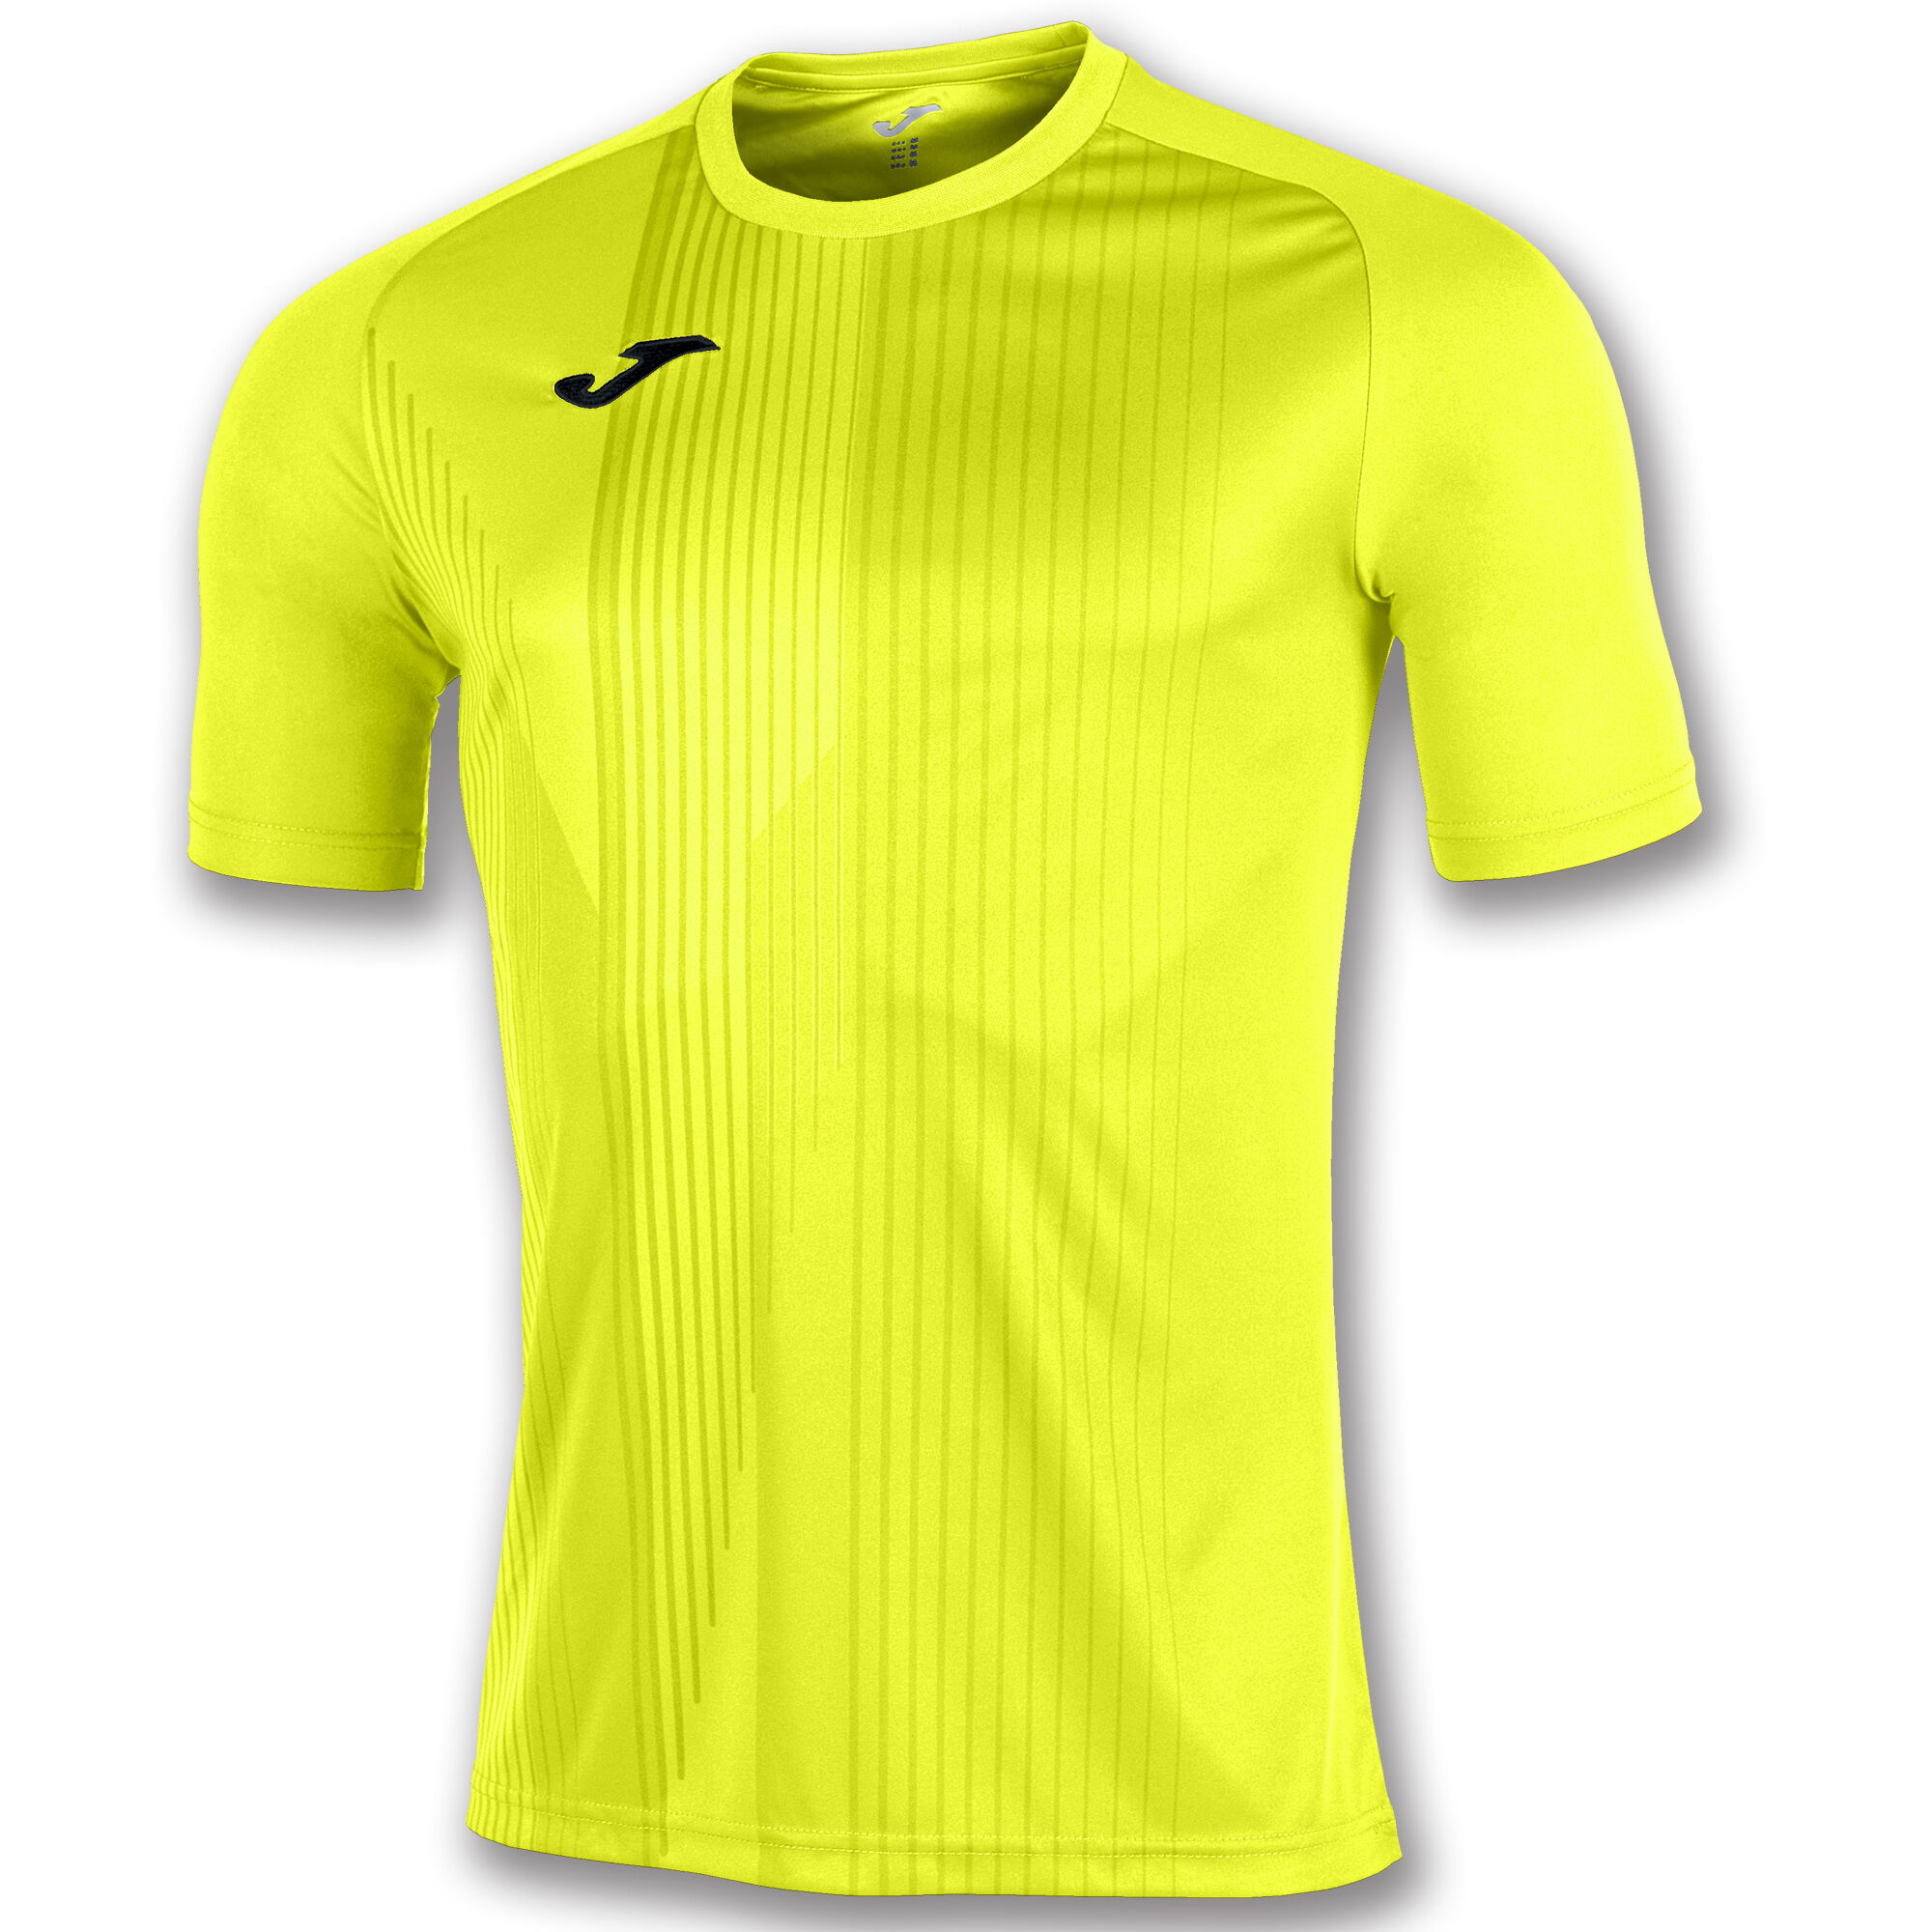 MAILLOT MANCHES COURTES HOMME TIGER JAUNE FLUO